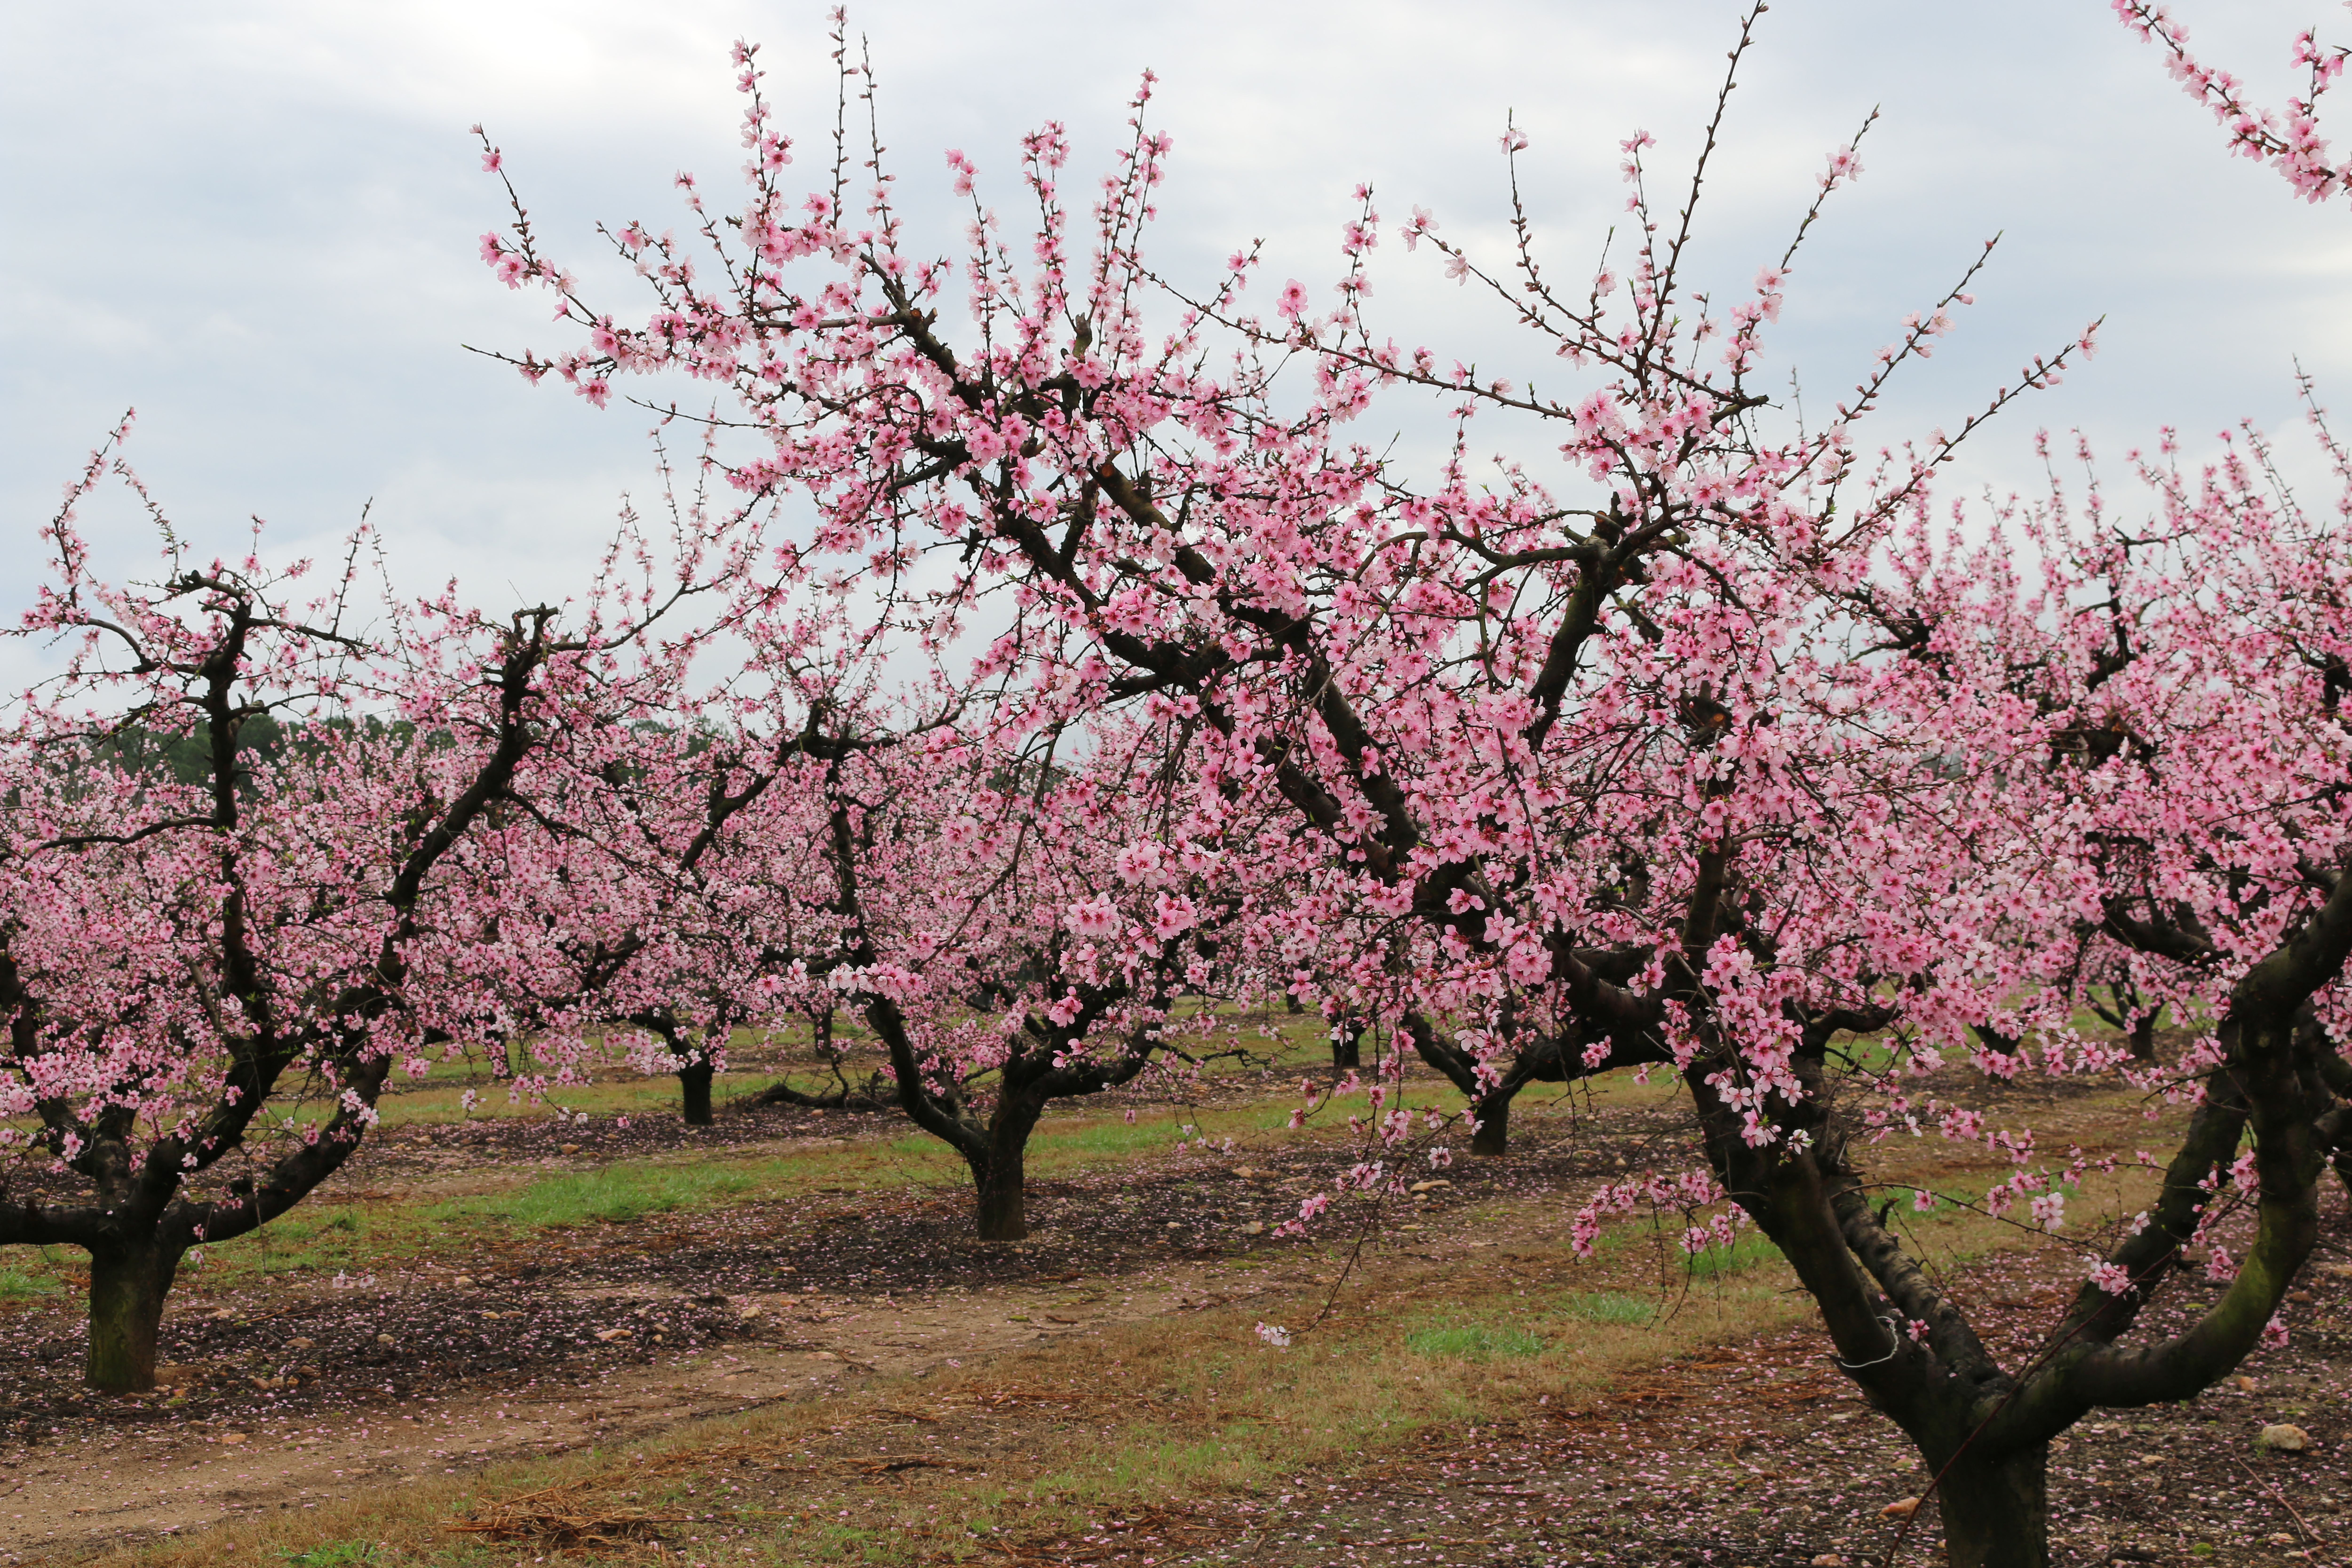 Musser Fruit Research Center peach trees in bloom.